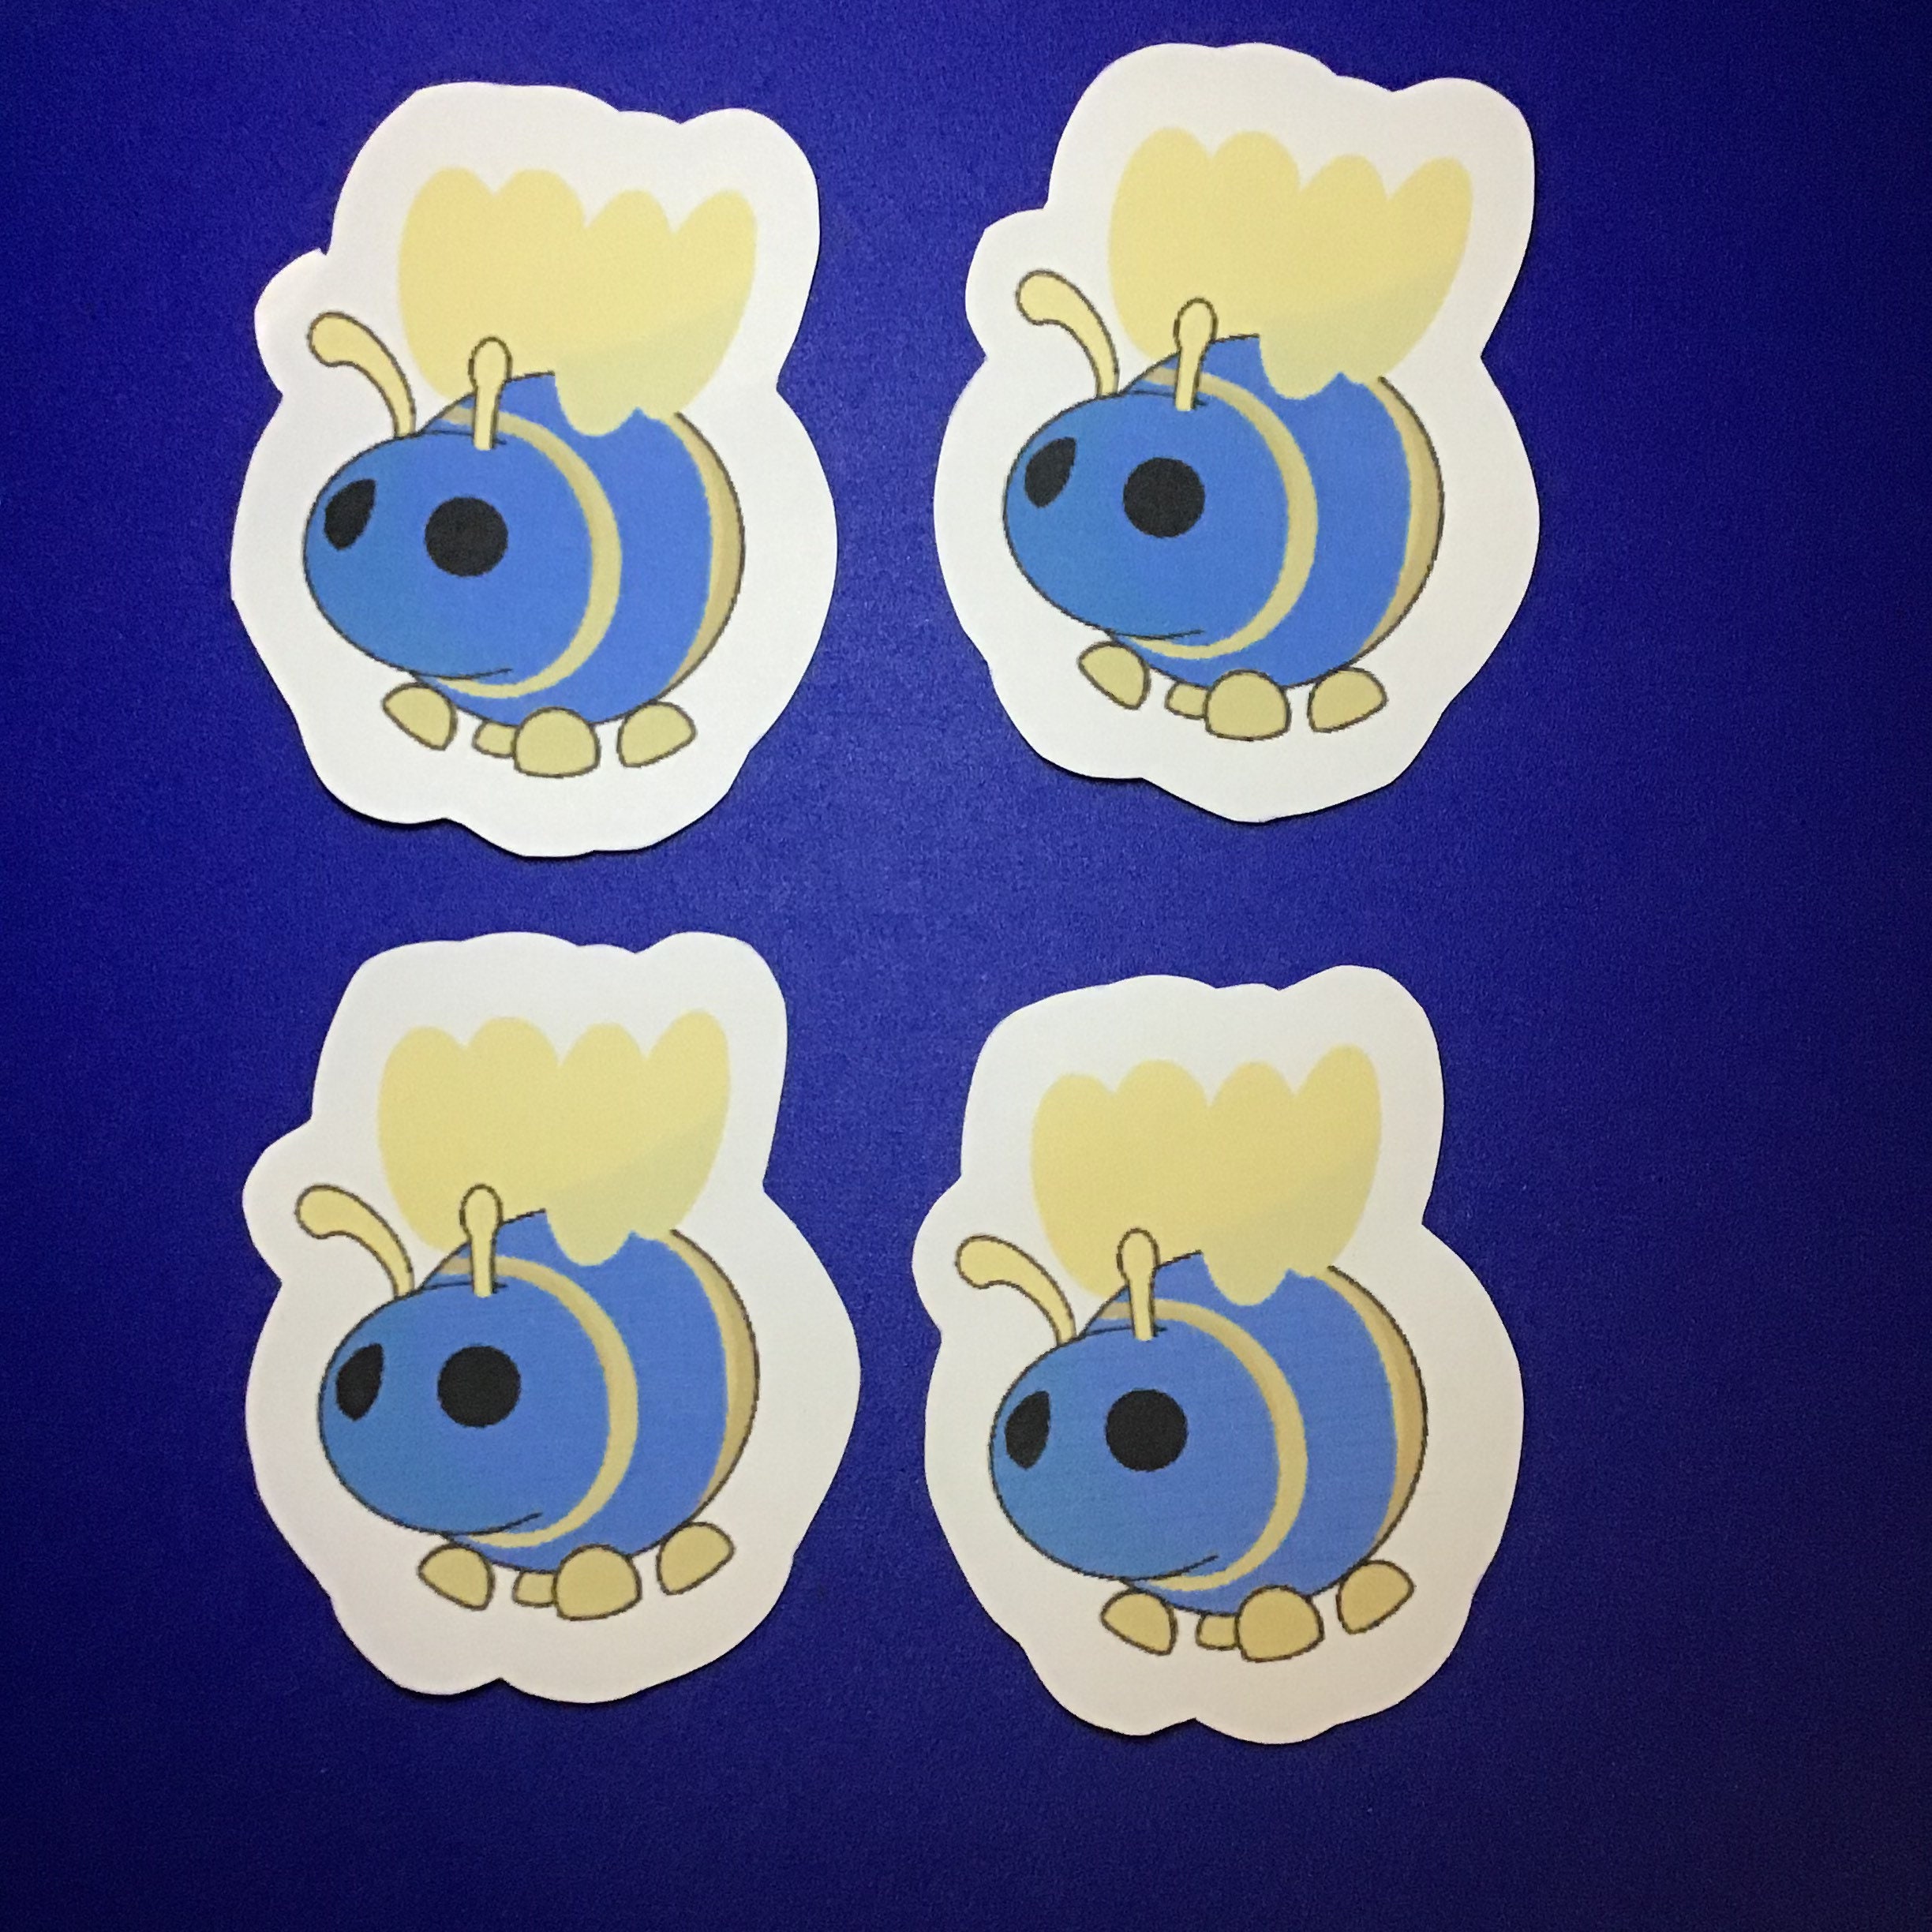 Roblox Adopt Me Queen Bee Sticker Etsy - adopt me roblox birthday decorations